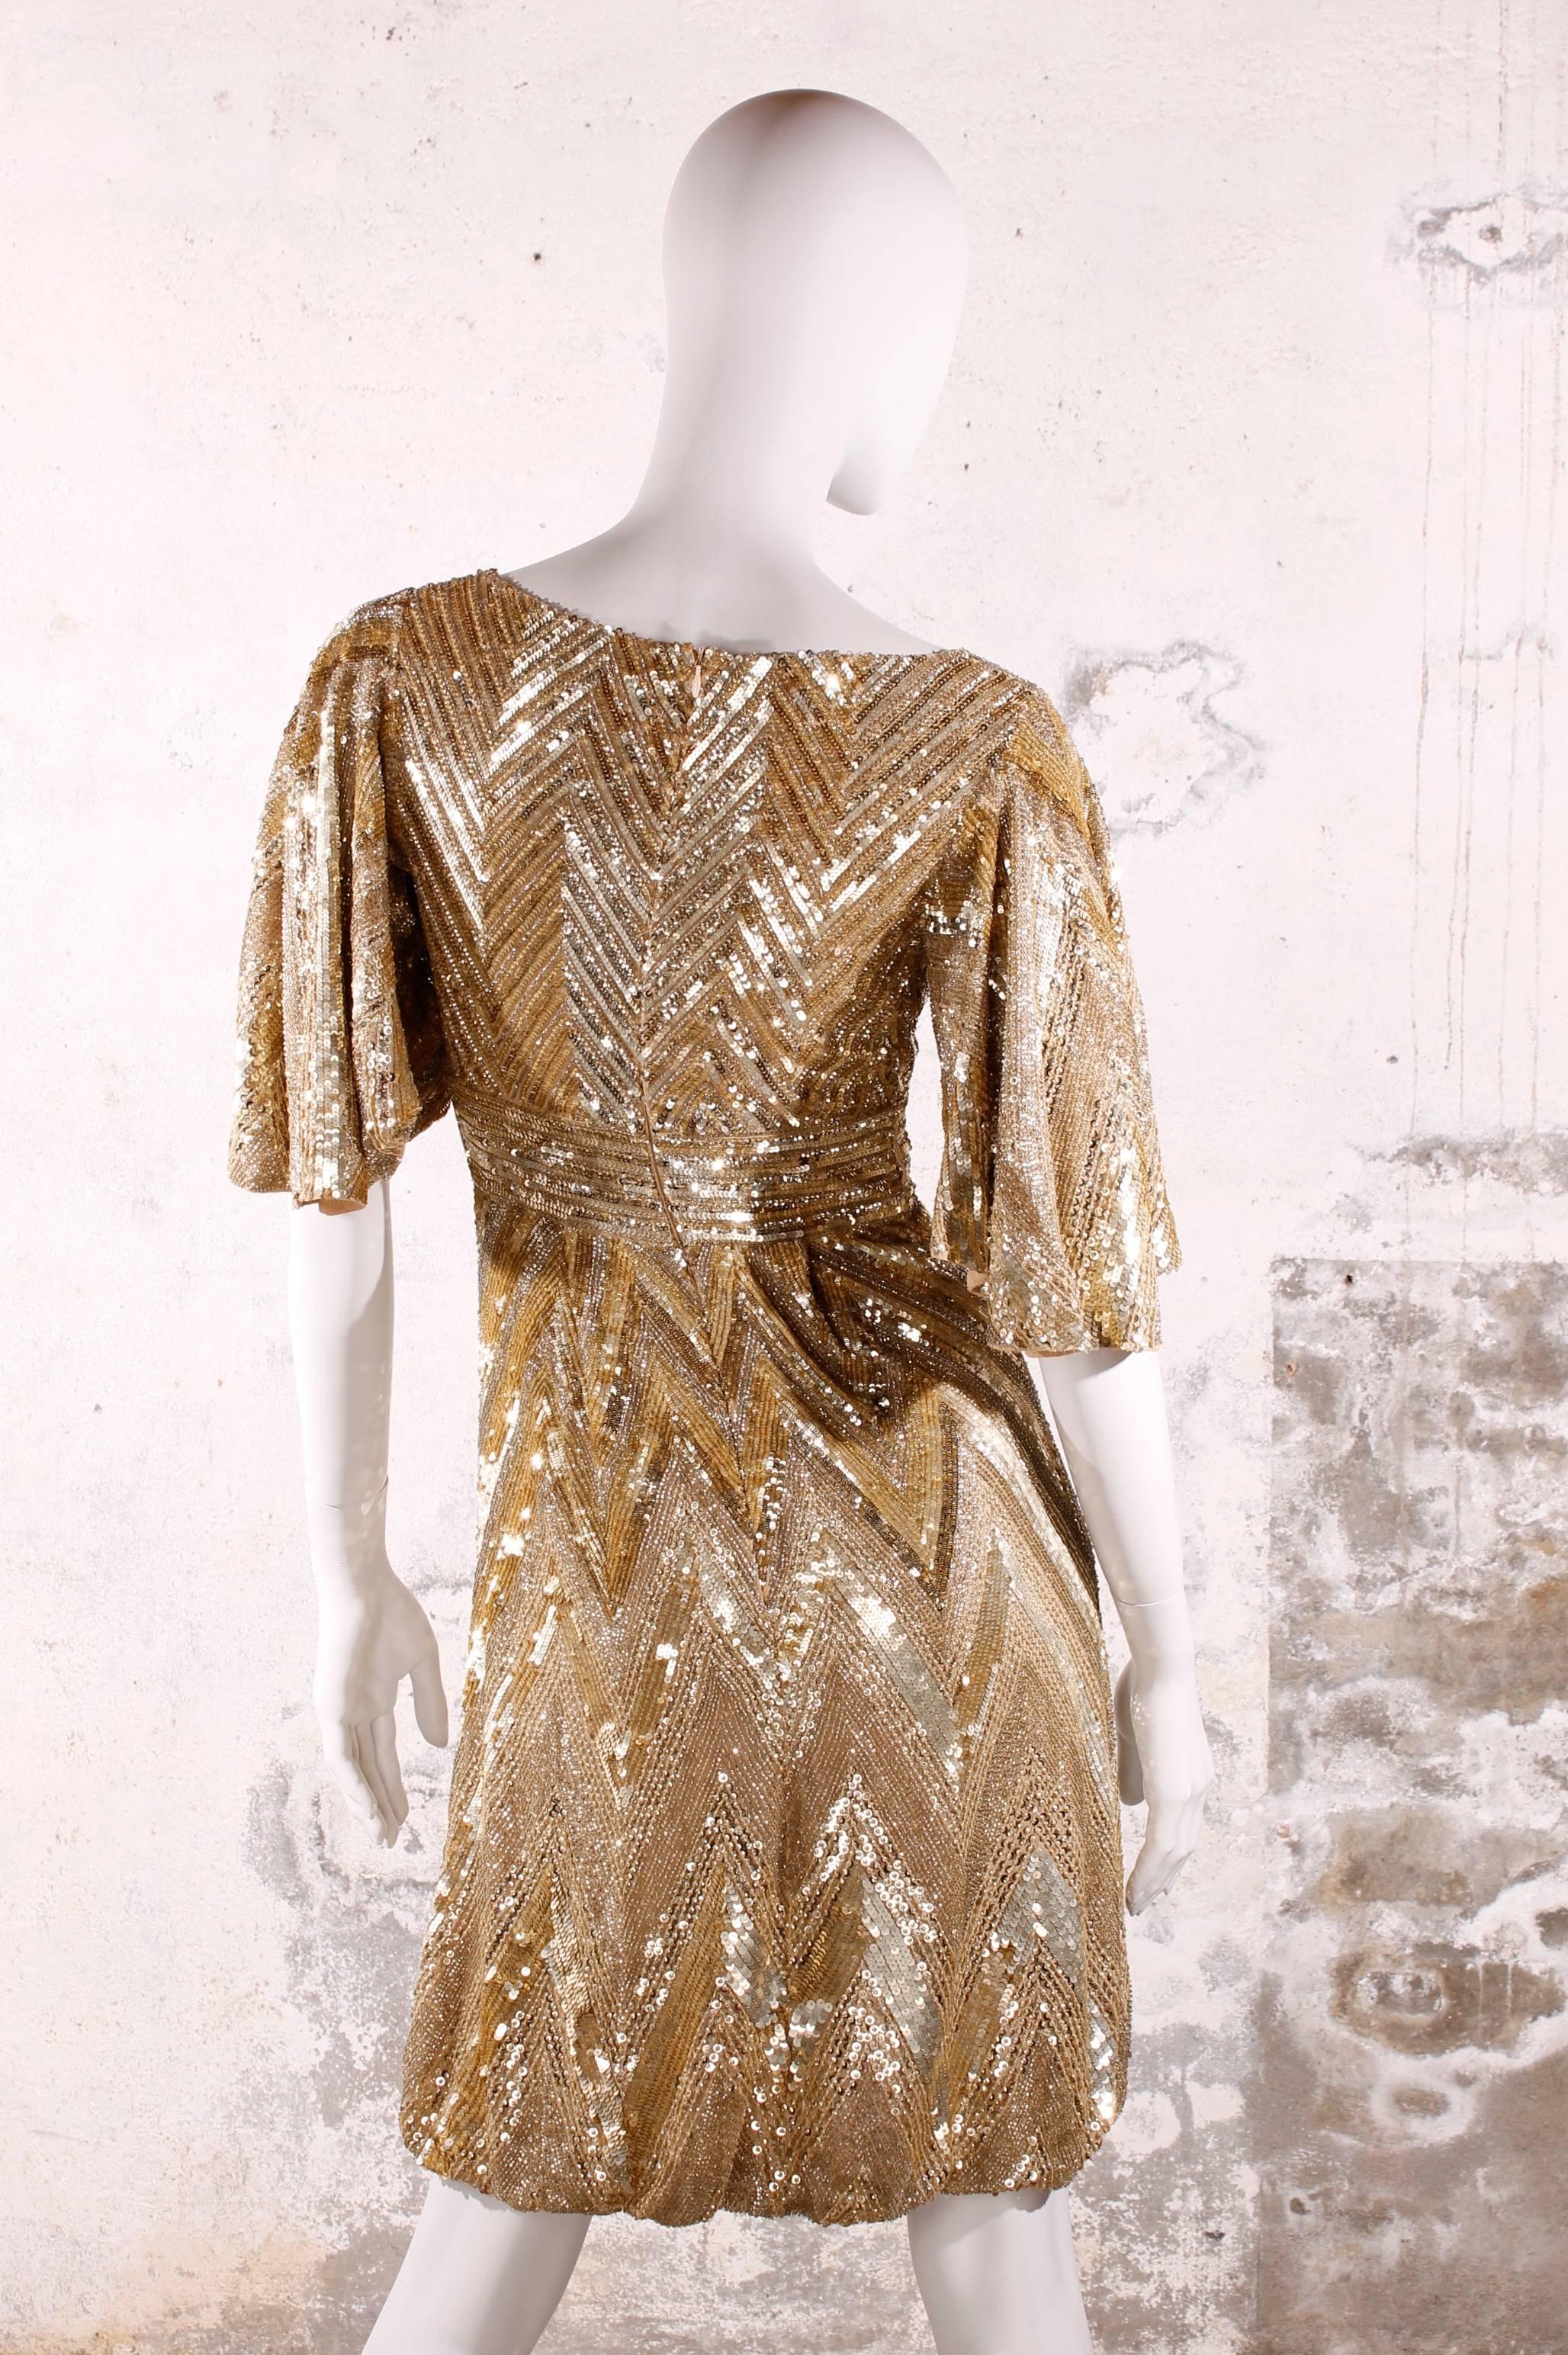 Très chique Elie Saab cocktail dress totally covered with golden sequins and beads in a zig-zag pattern. A festive eye-catcher!

Empire dress with a very low cut V-neck and short sleeves. Dress has knee-length and a balloon skirt. 

A zipper on